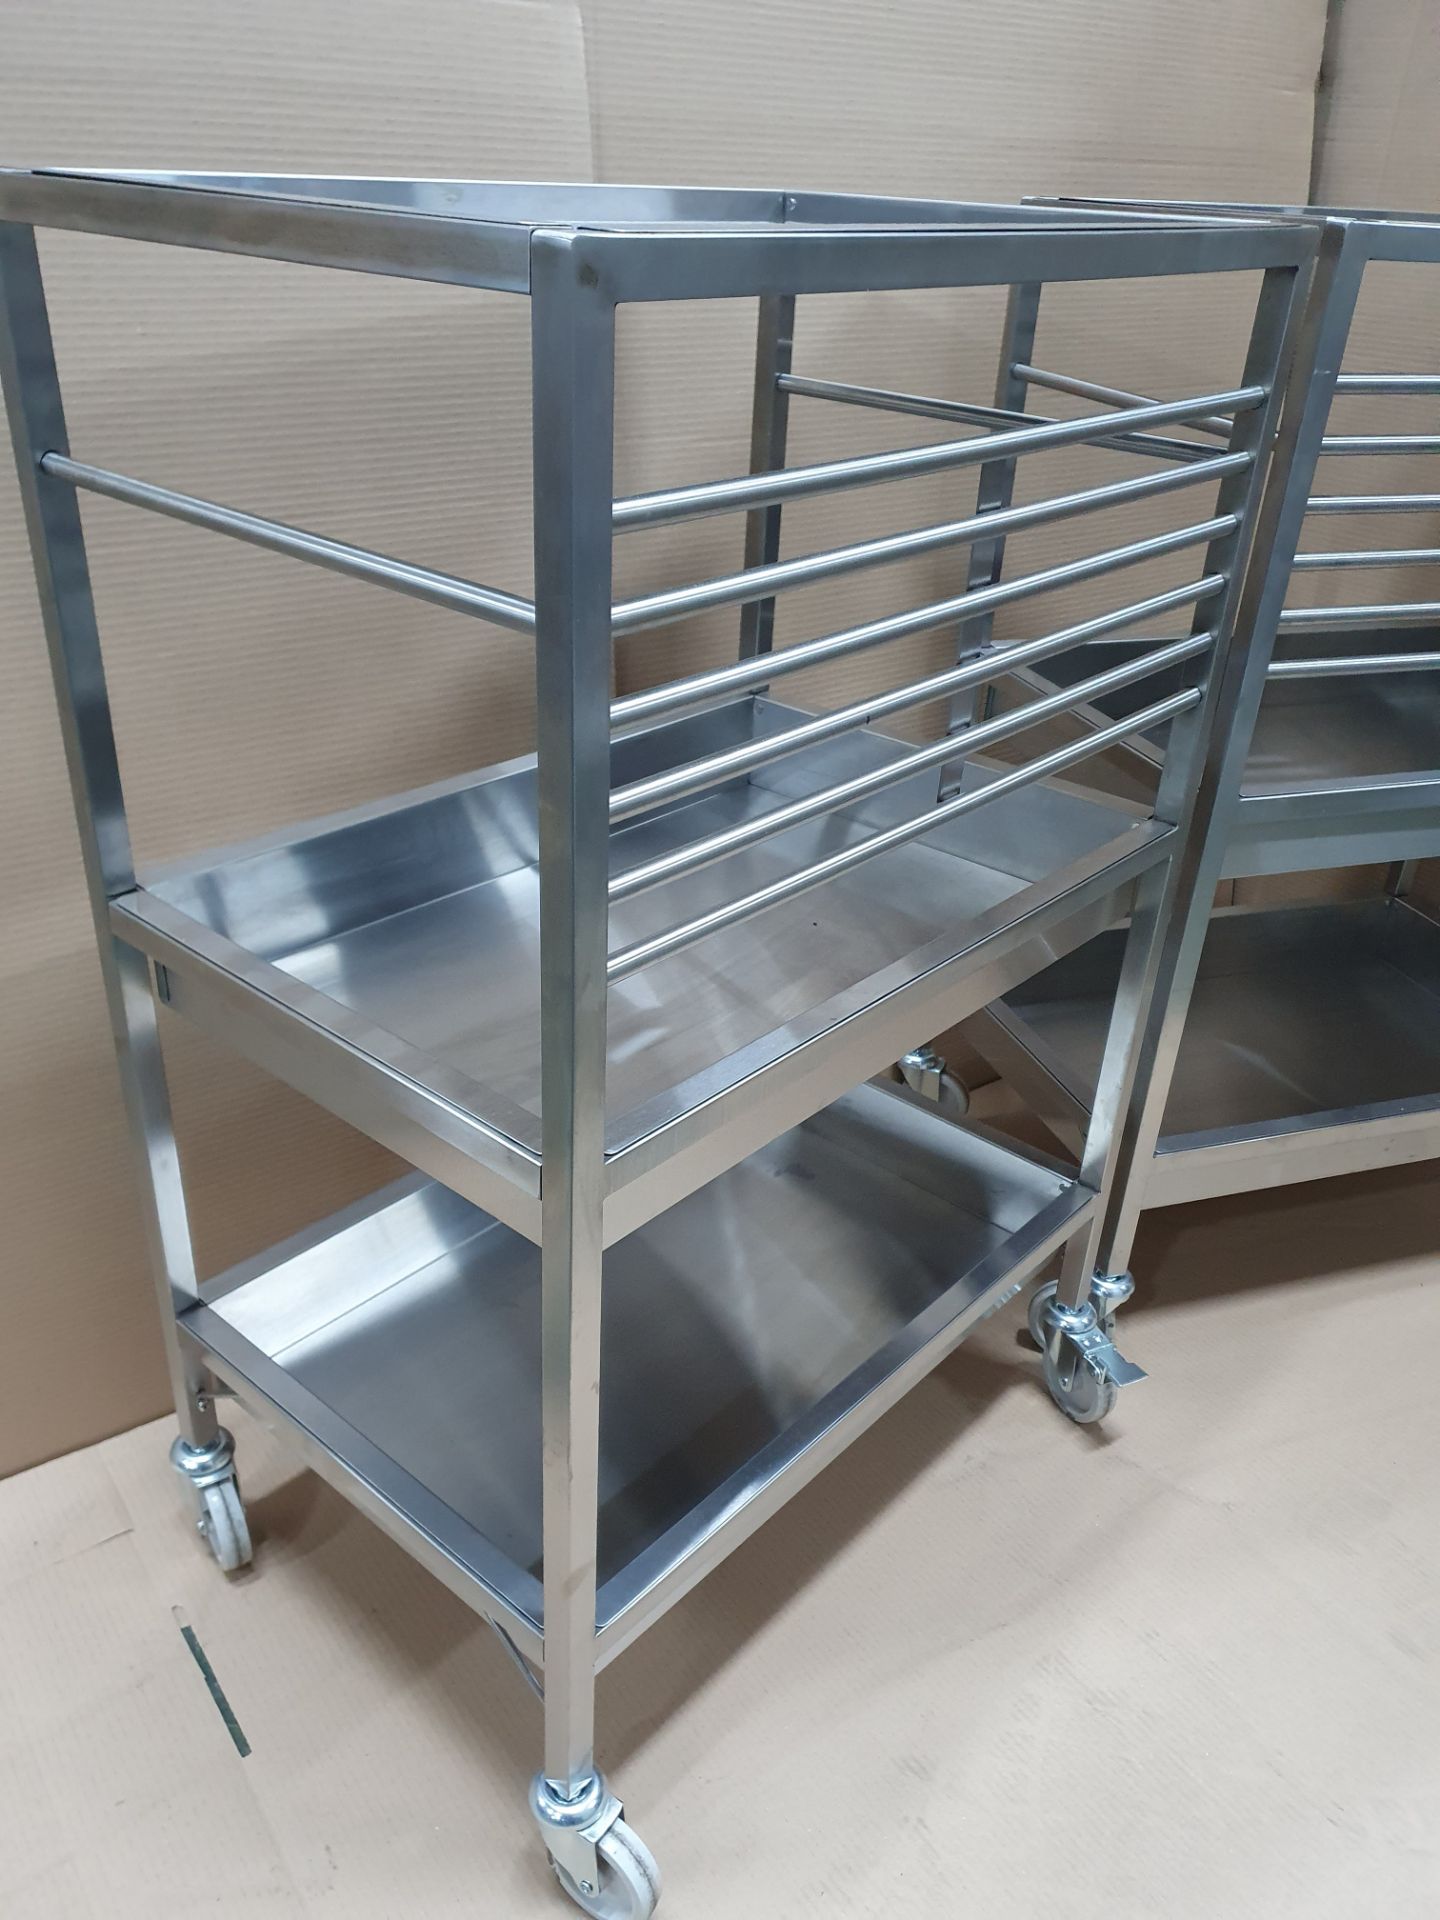 2 x 3 tier Metal trollies on Wheels with Removable Shelves - Image 5 of 7